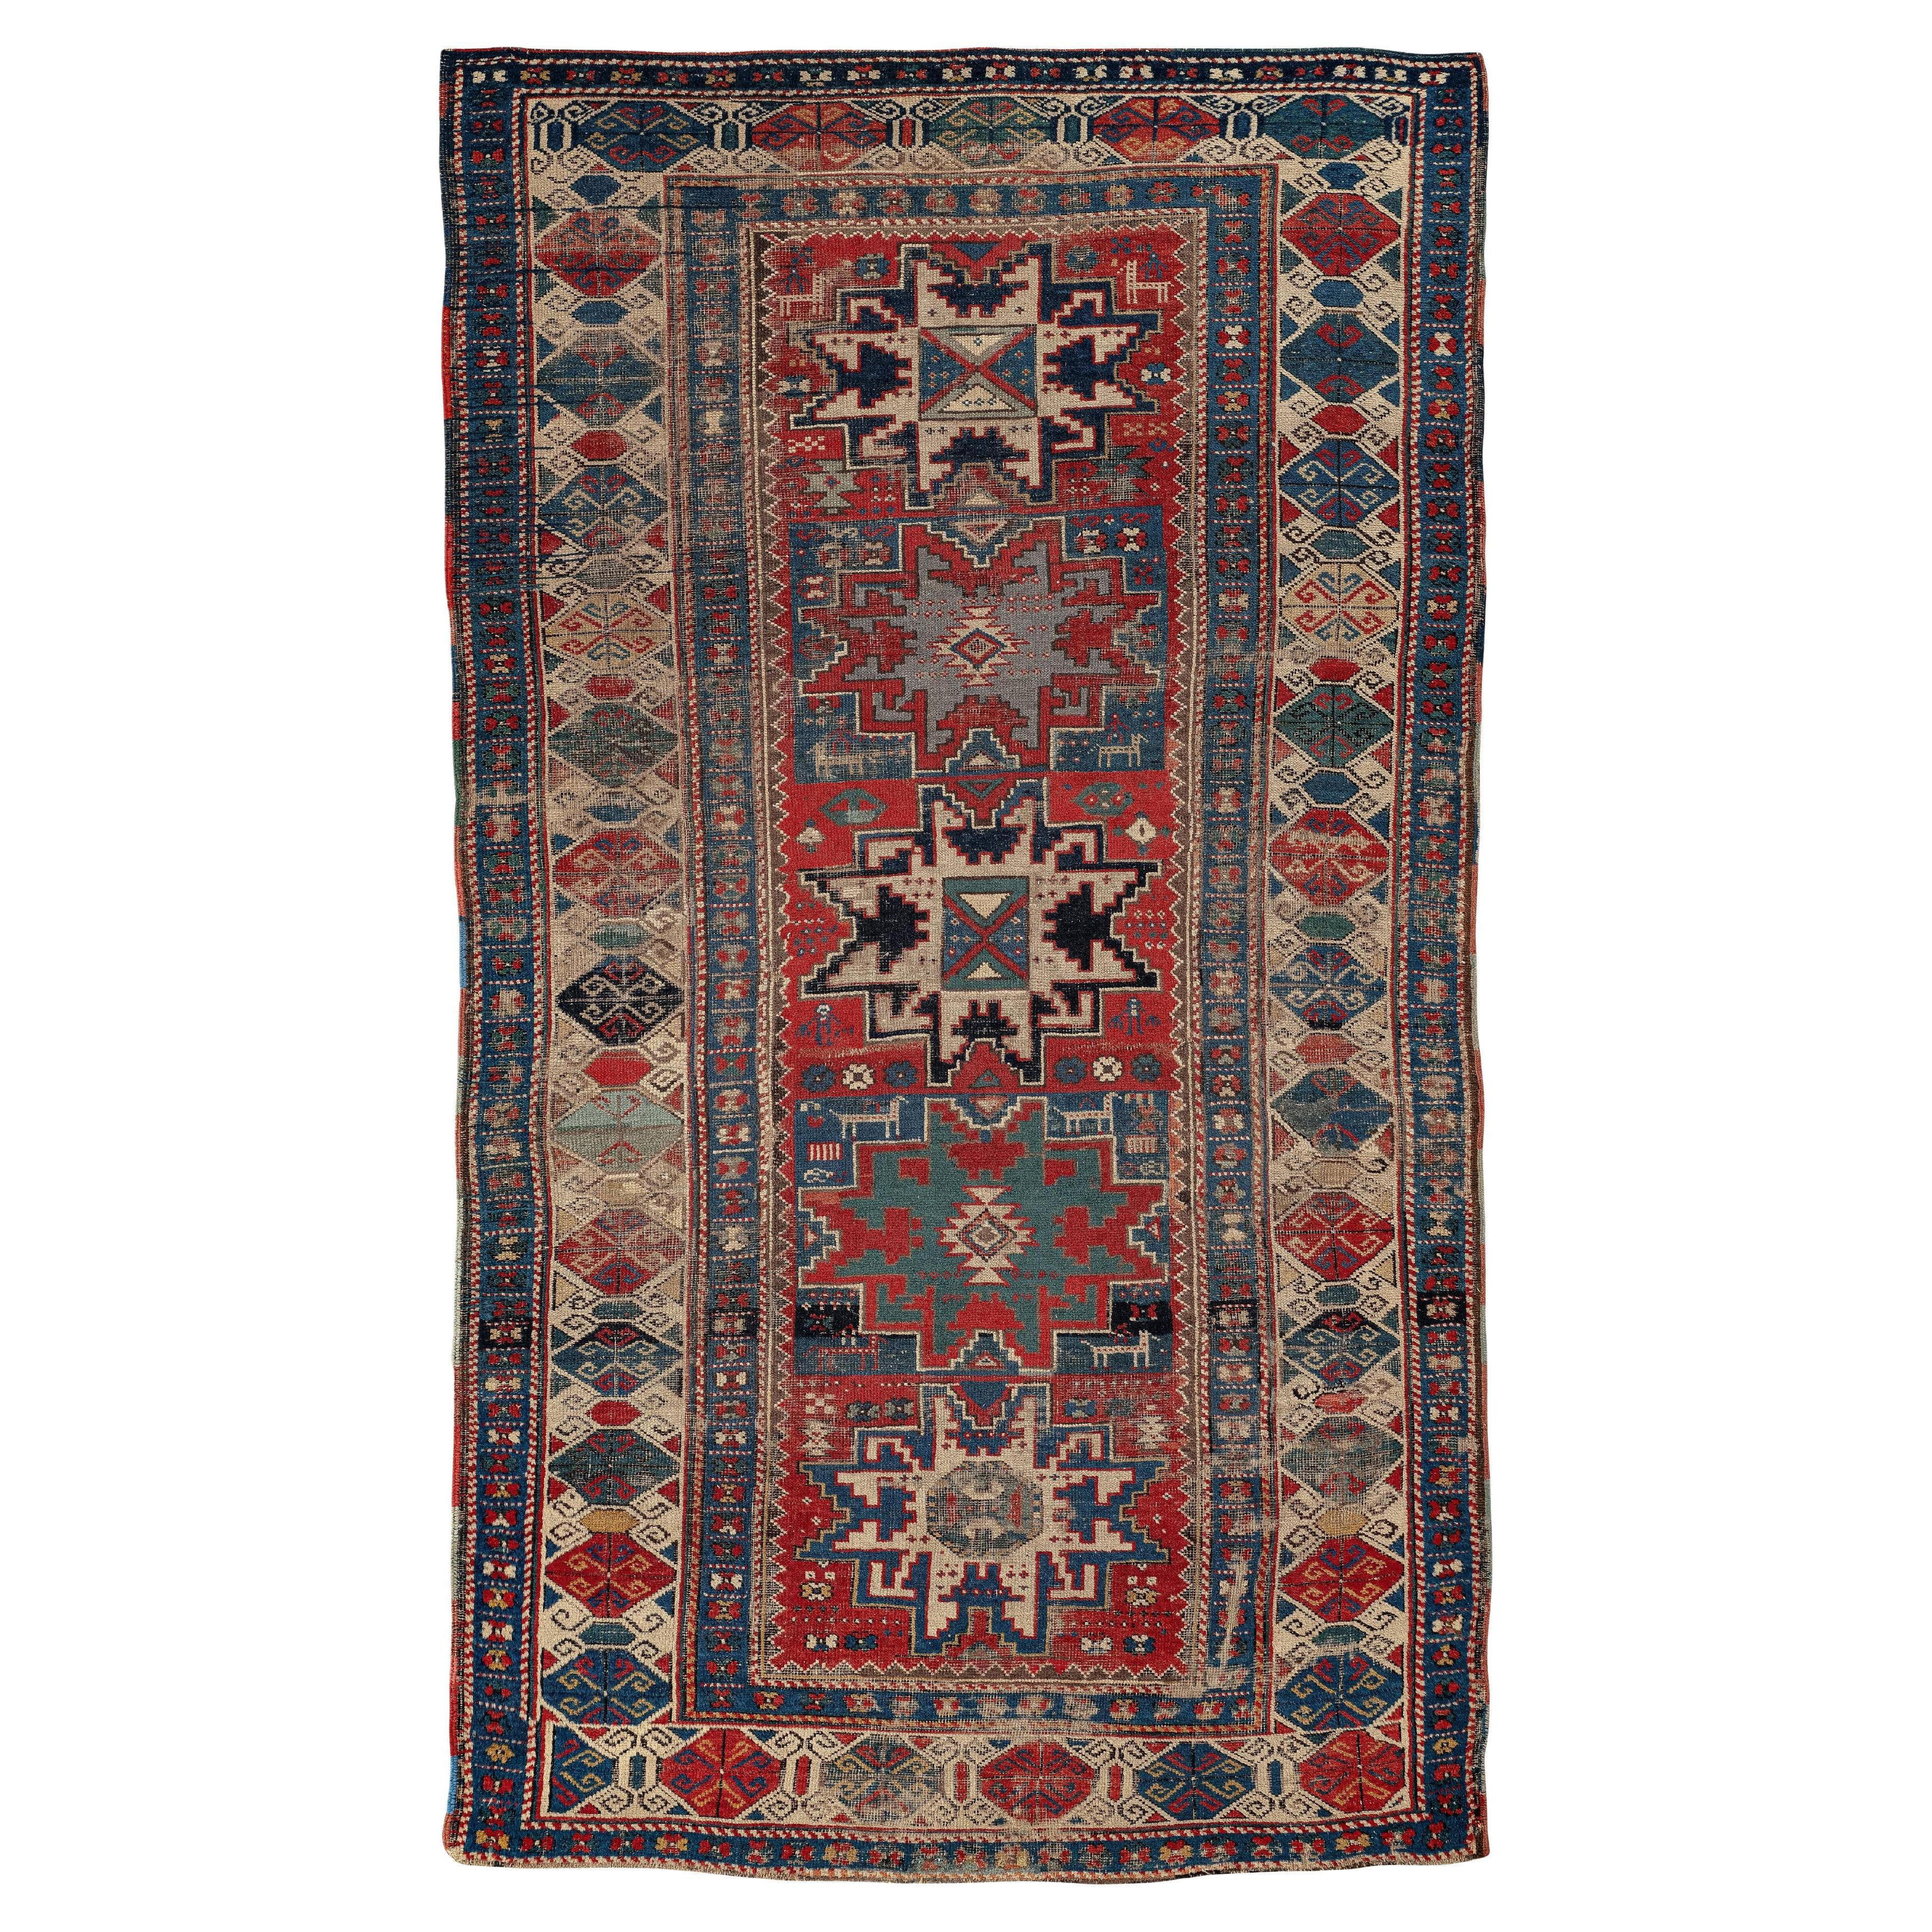 Lesghi – Dagestan, Northeast Caucasus

This vibrant rug features the familiar lesghi stars – the geometric figure identifying this Caucasian group. In an extensive field of red jasper, five star-shaped figures float amidst a cosmos of geometric